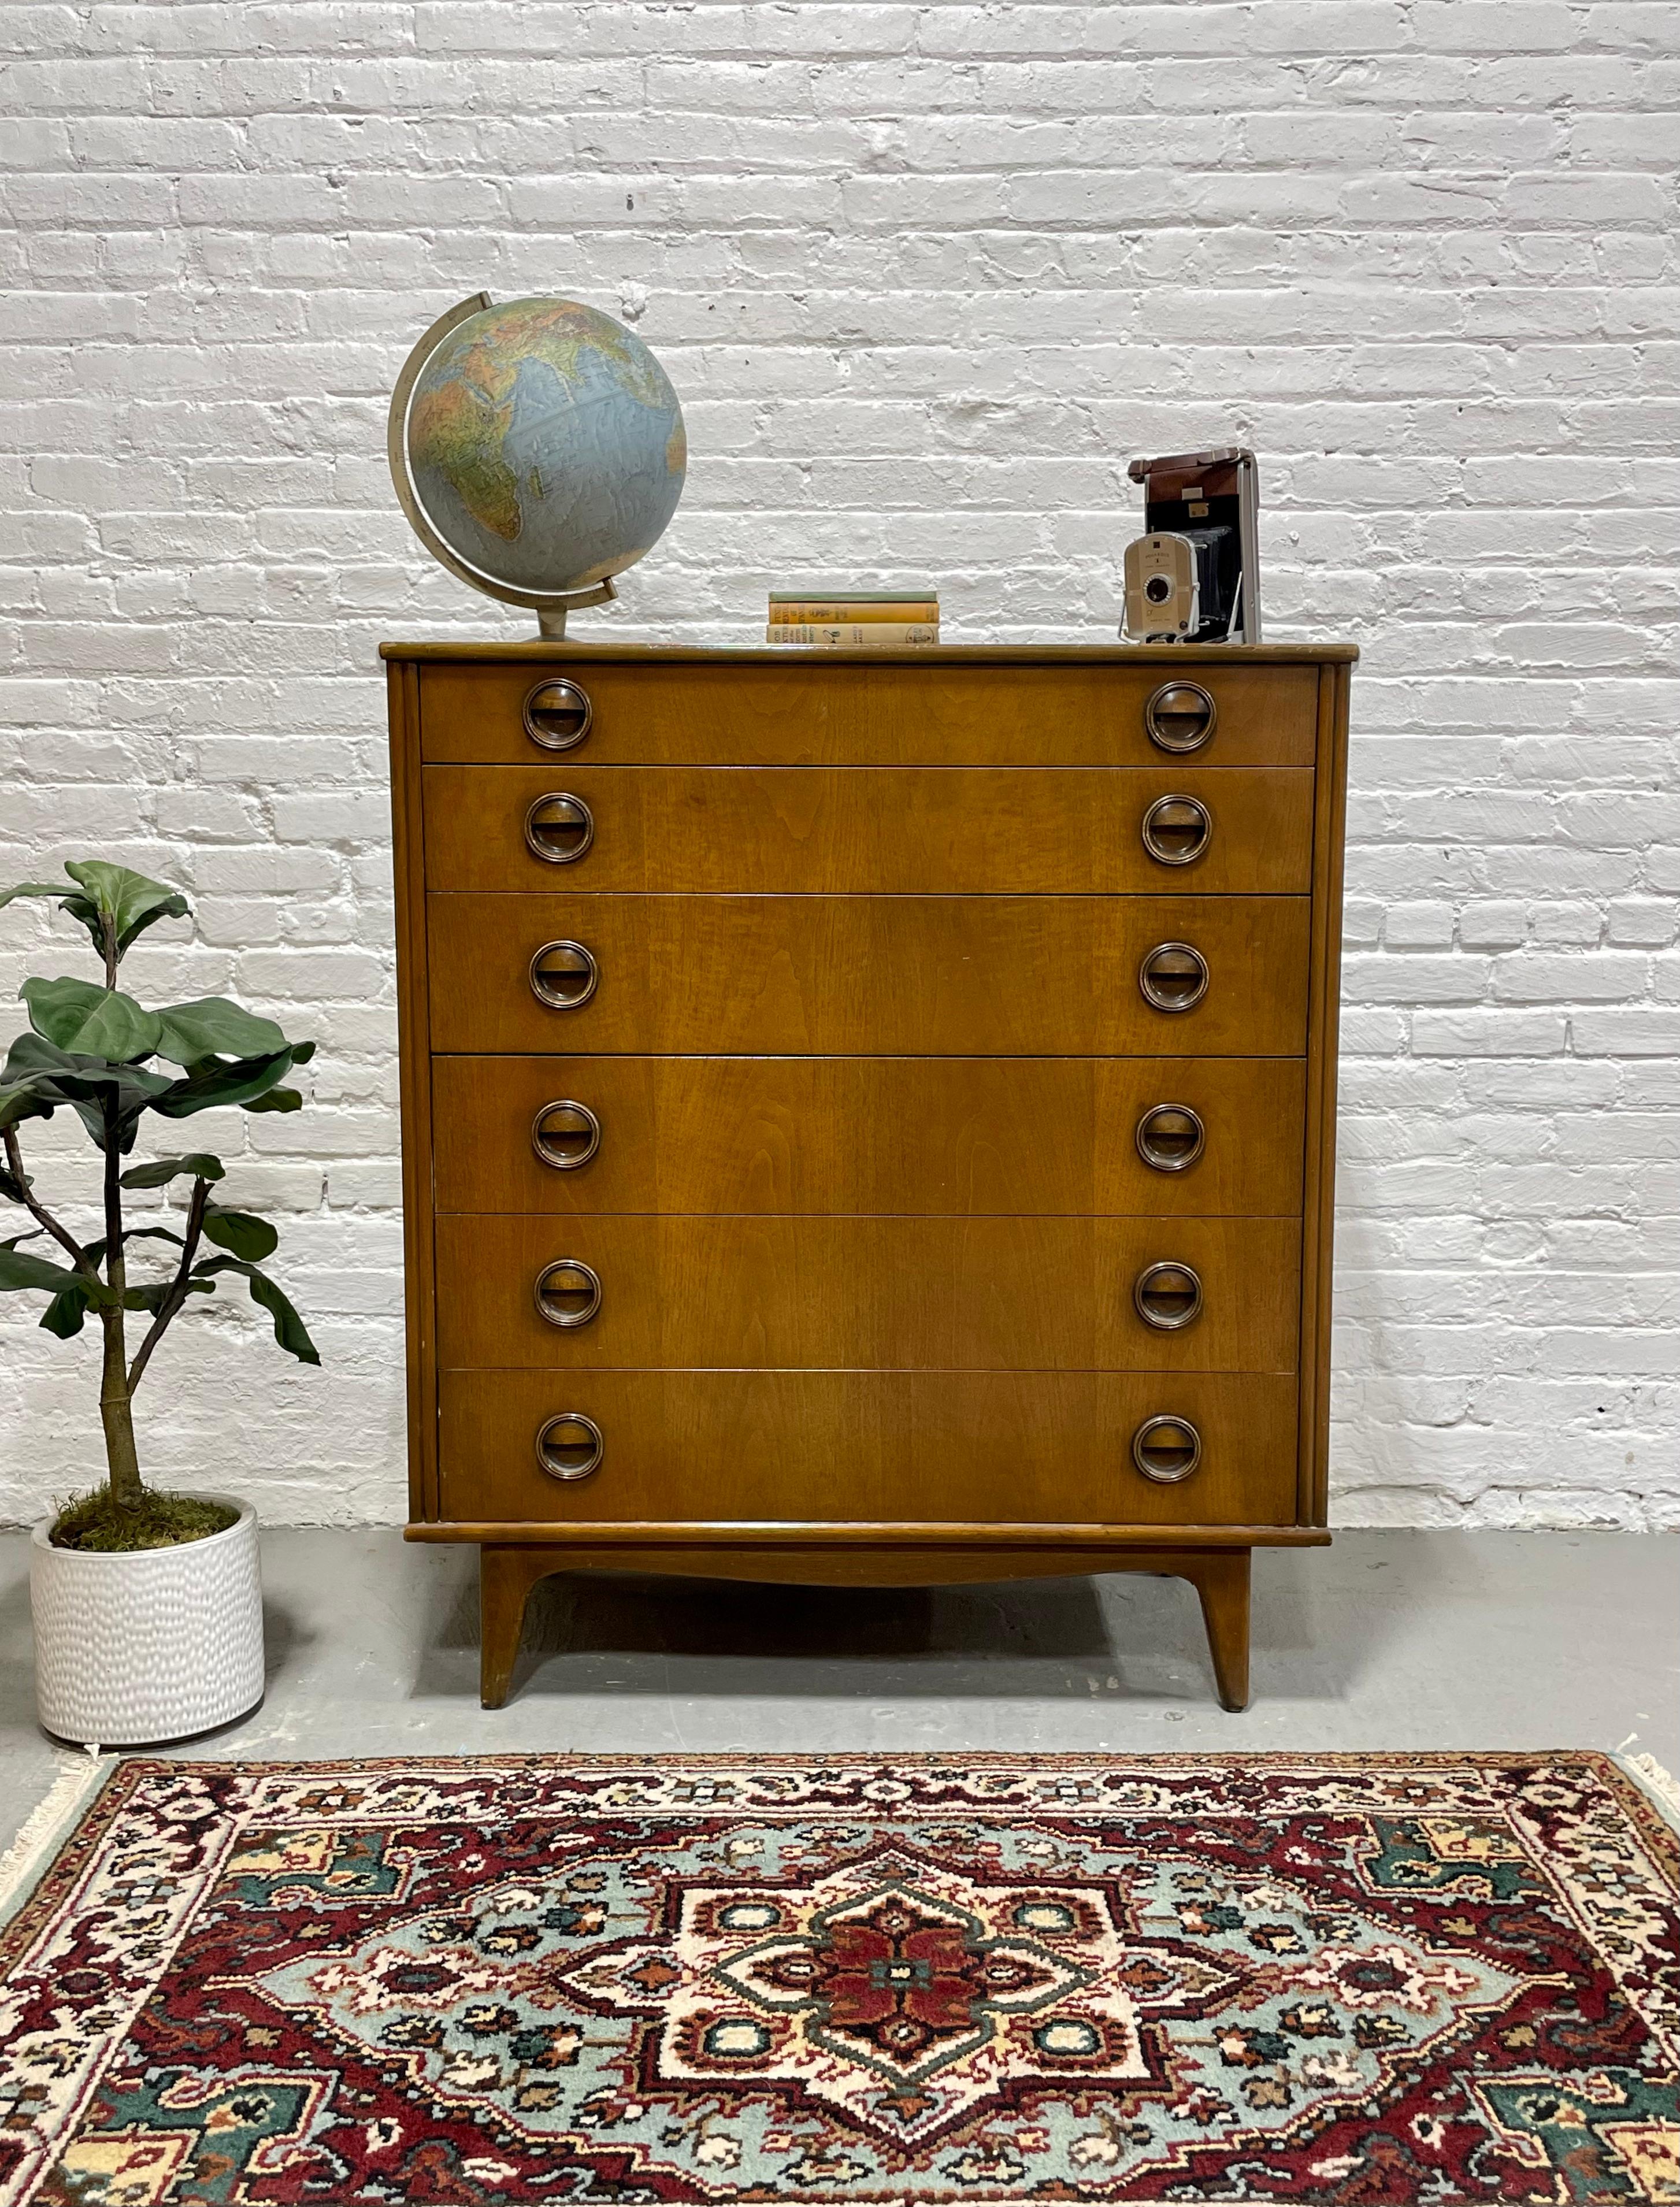 Mid Century Modern Walnut bedroom set by Landstrom Furniture Co., c. 1960's. Two fantastic solidly built pieces offering TONS of storage space with handsome 